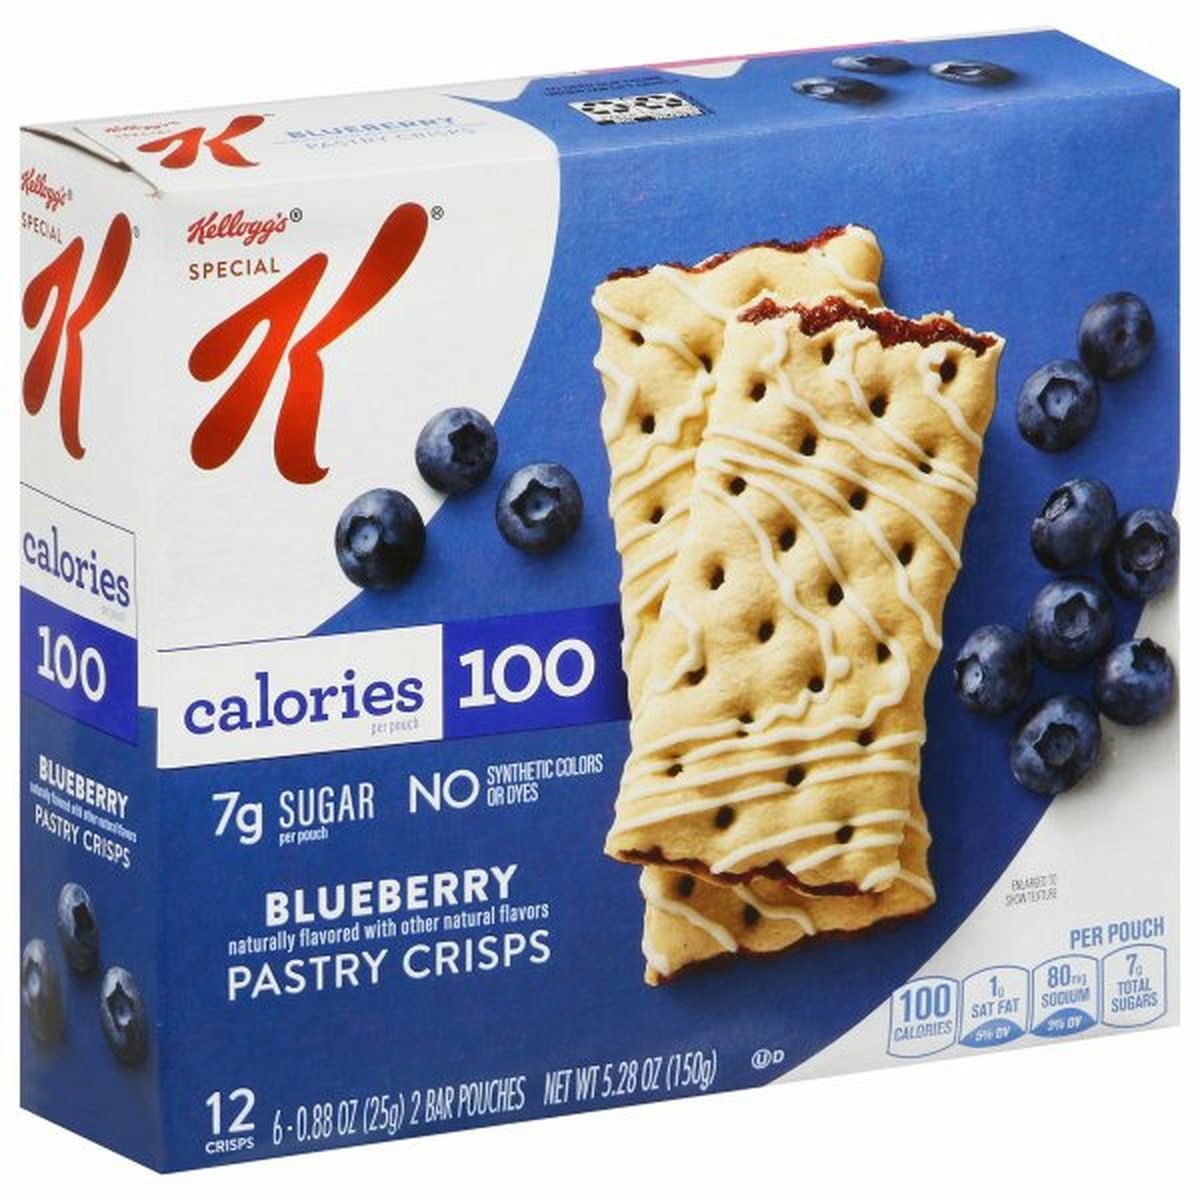 Calories in Kellogg's Special K Special K Pastry Crisps, Blueberry